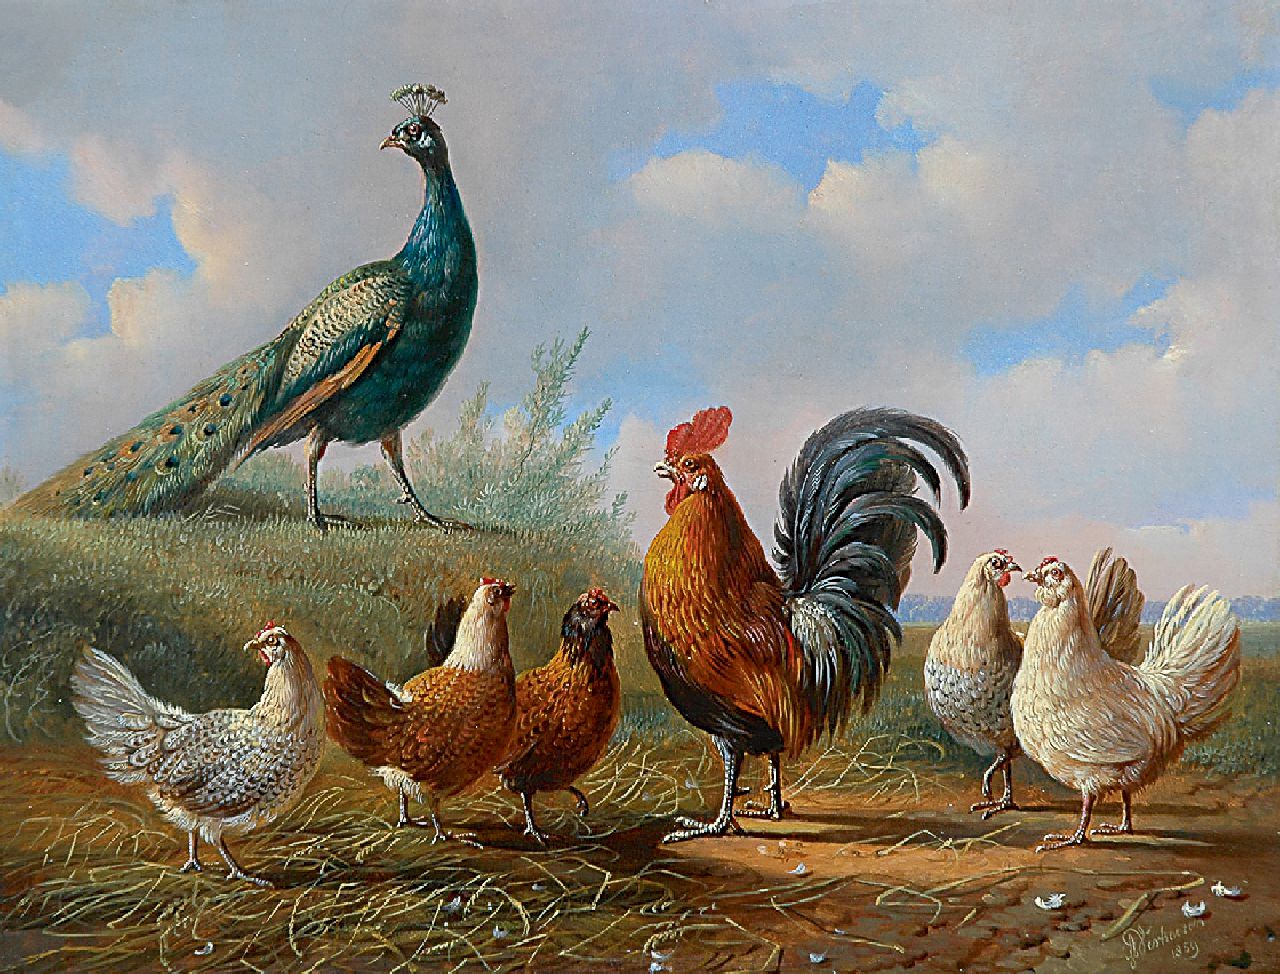 Verhoesen A.  | Albertus Verhoesen, A peacock, a cock and his fowls in a landscape, Öl auf Holz 25,2 x 33,1 cm, signed l.r. und painted 1859